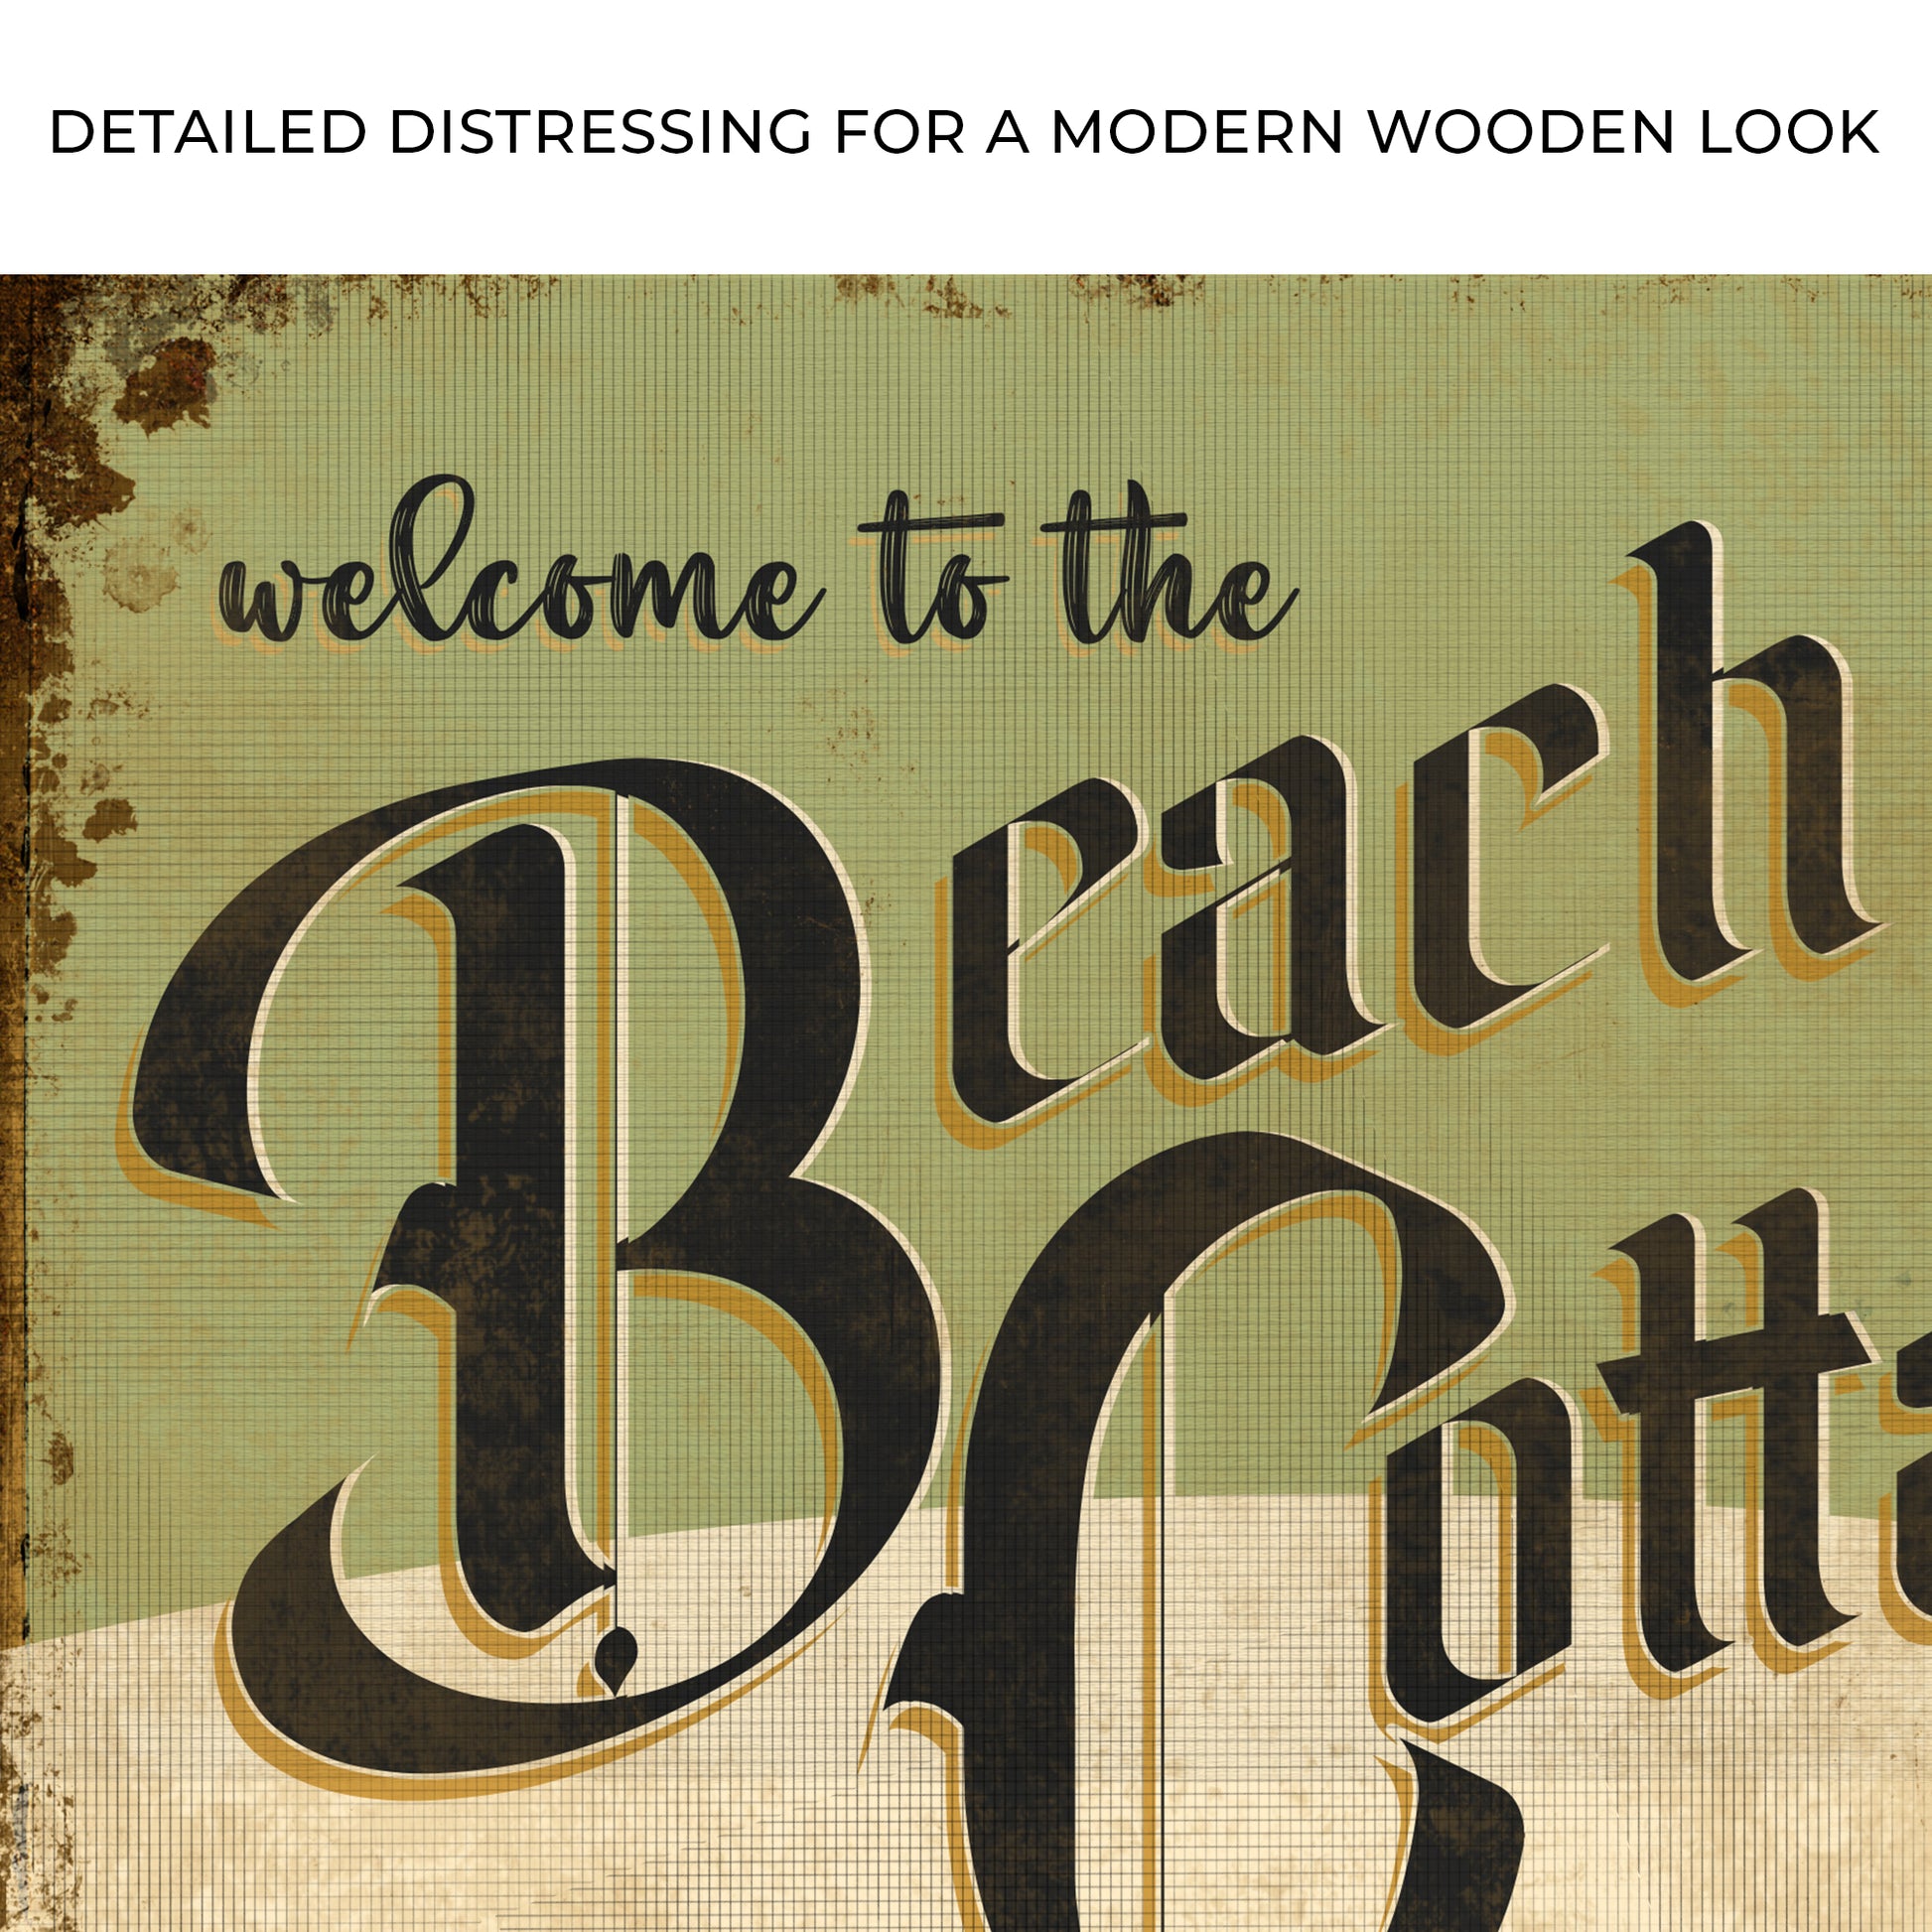 Welcome To The Beach Cottage Sign Zoom - Image by Tailored Canvases